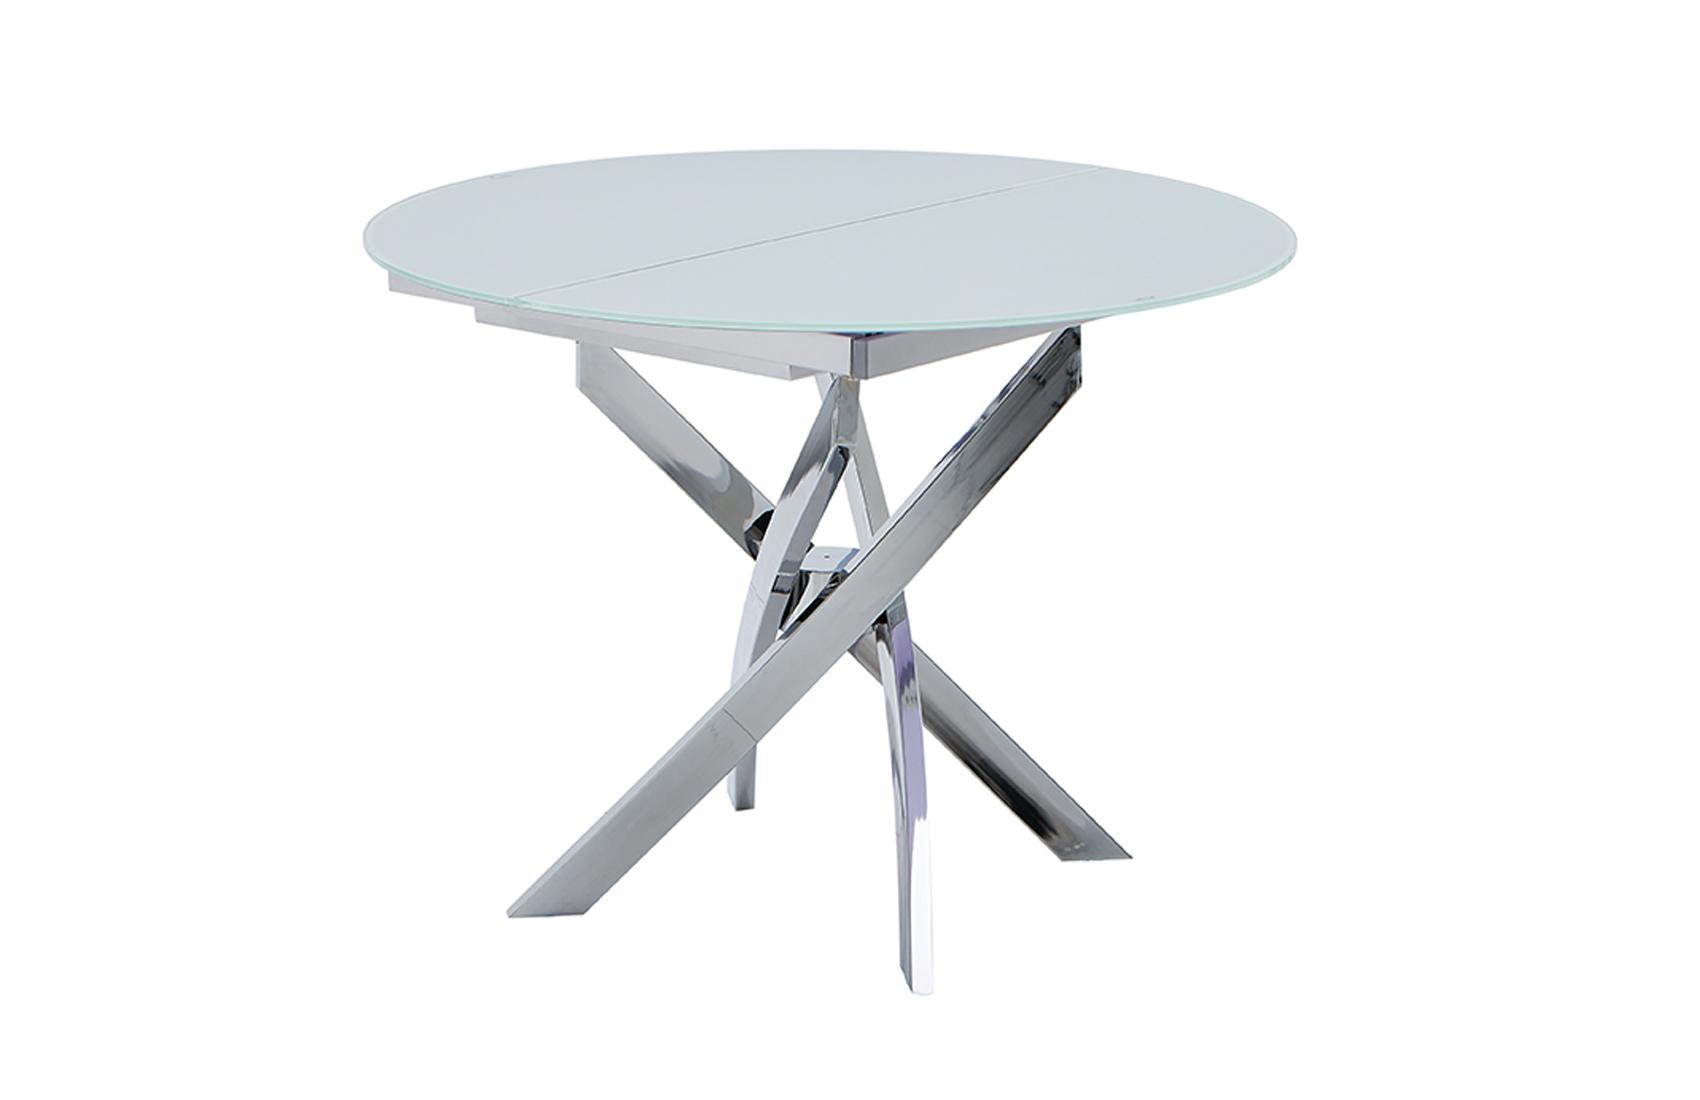 Contemporary, Modern Dining Table 2303 2303DININGTABLE in White, Silver Glass Top